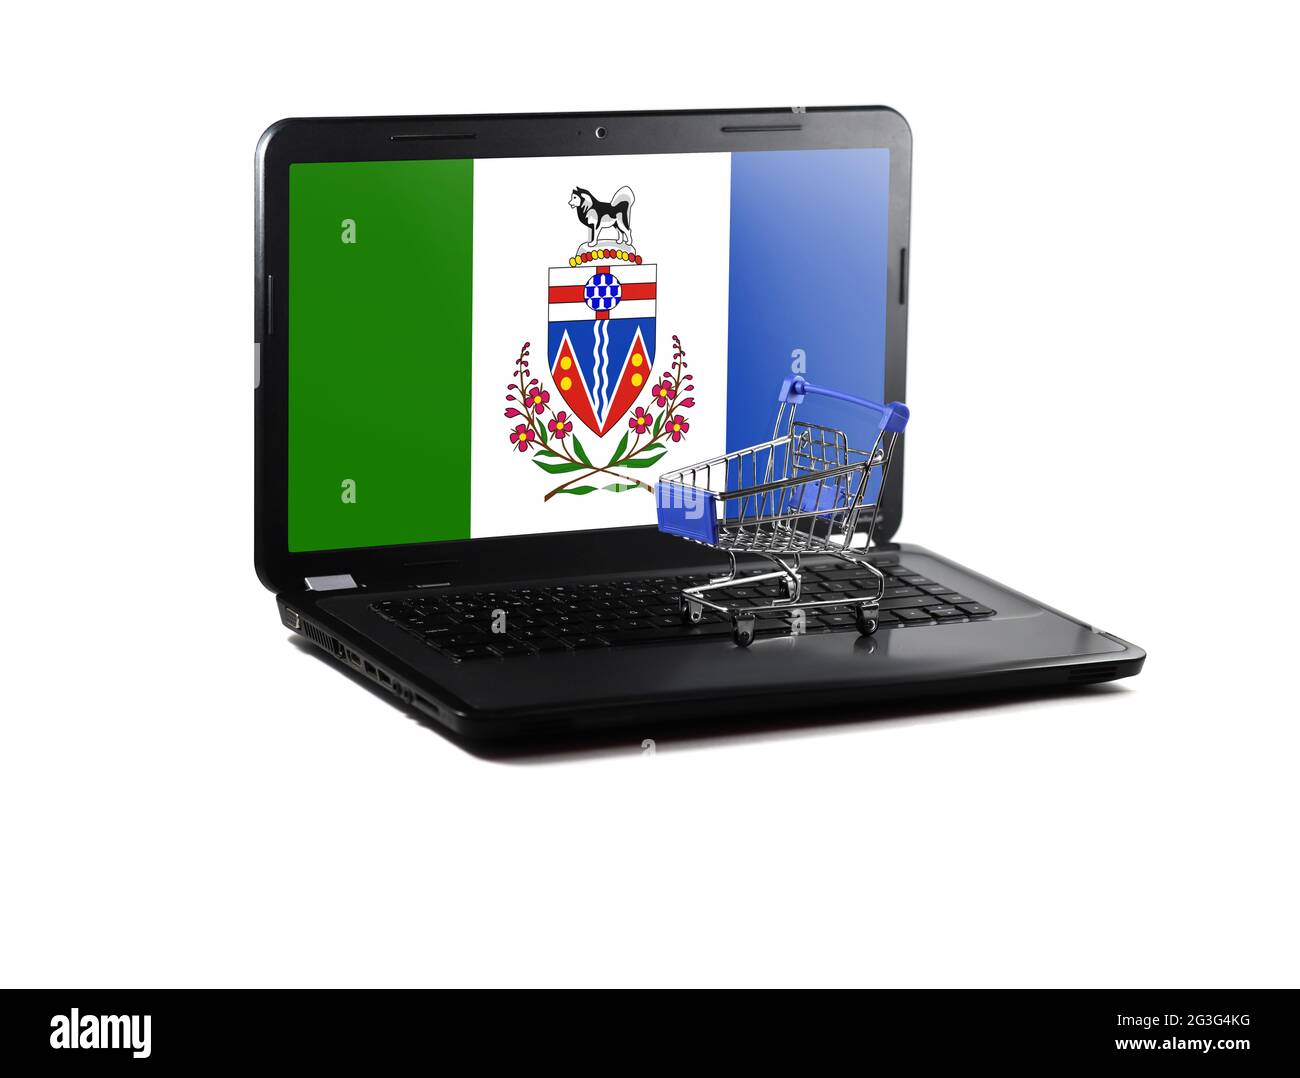 Isolated on white background laptop with Yukon flag on display, online shopping sale concept Stock Photo